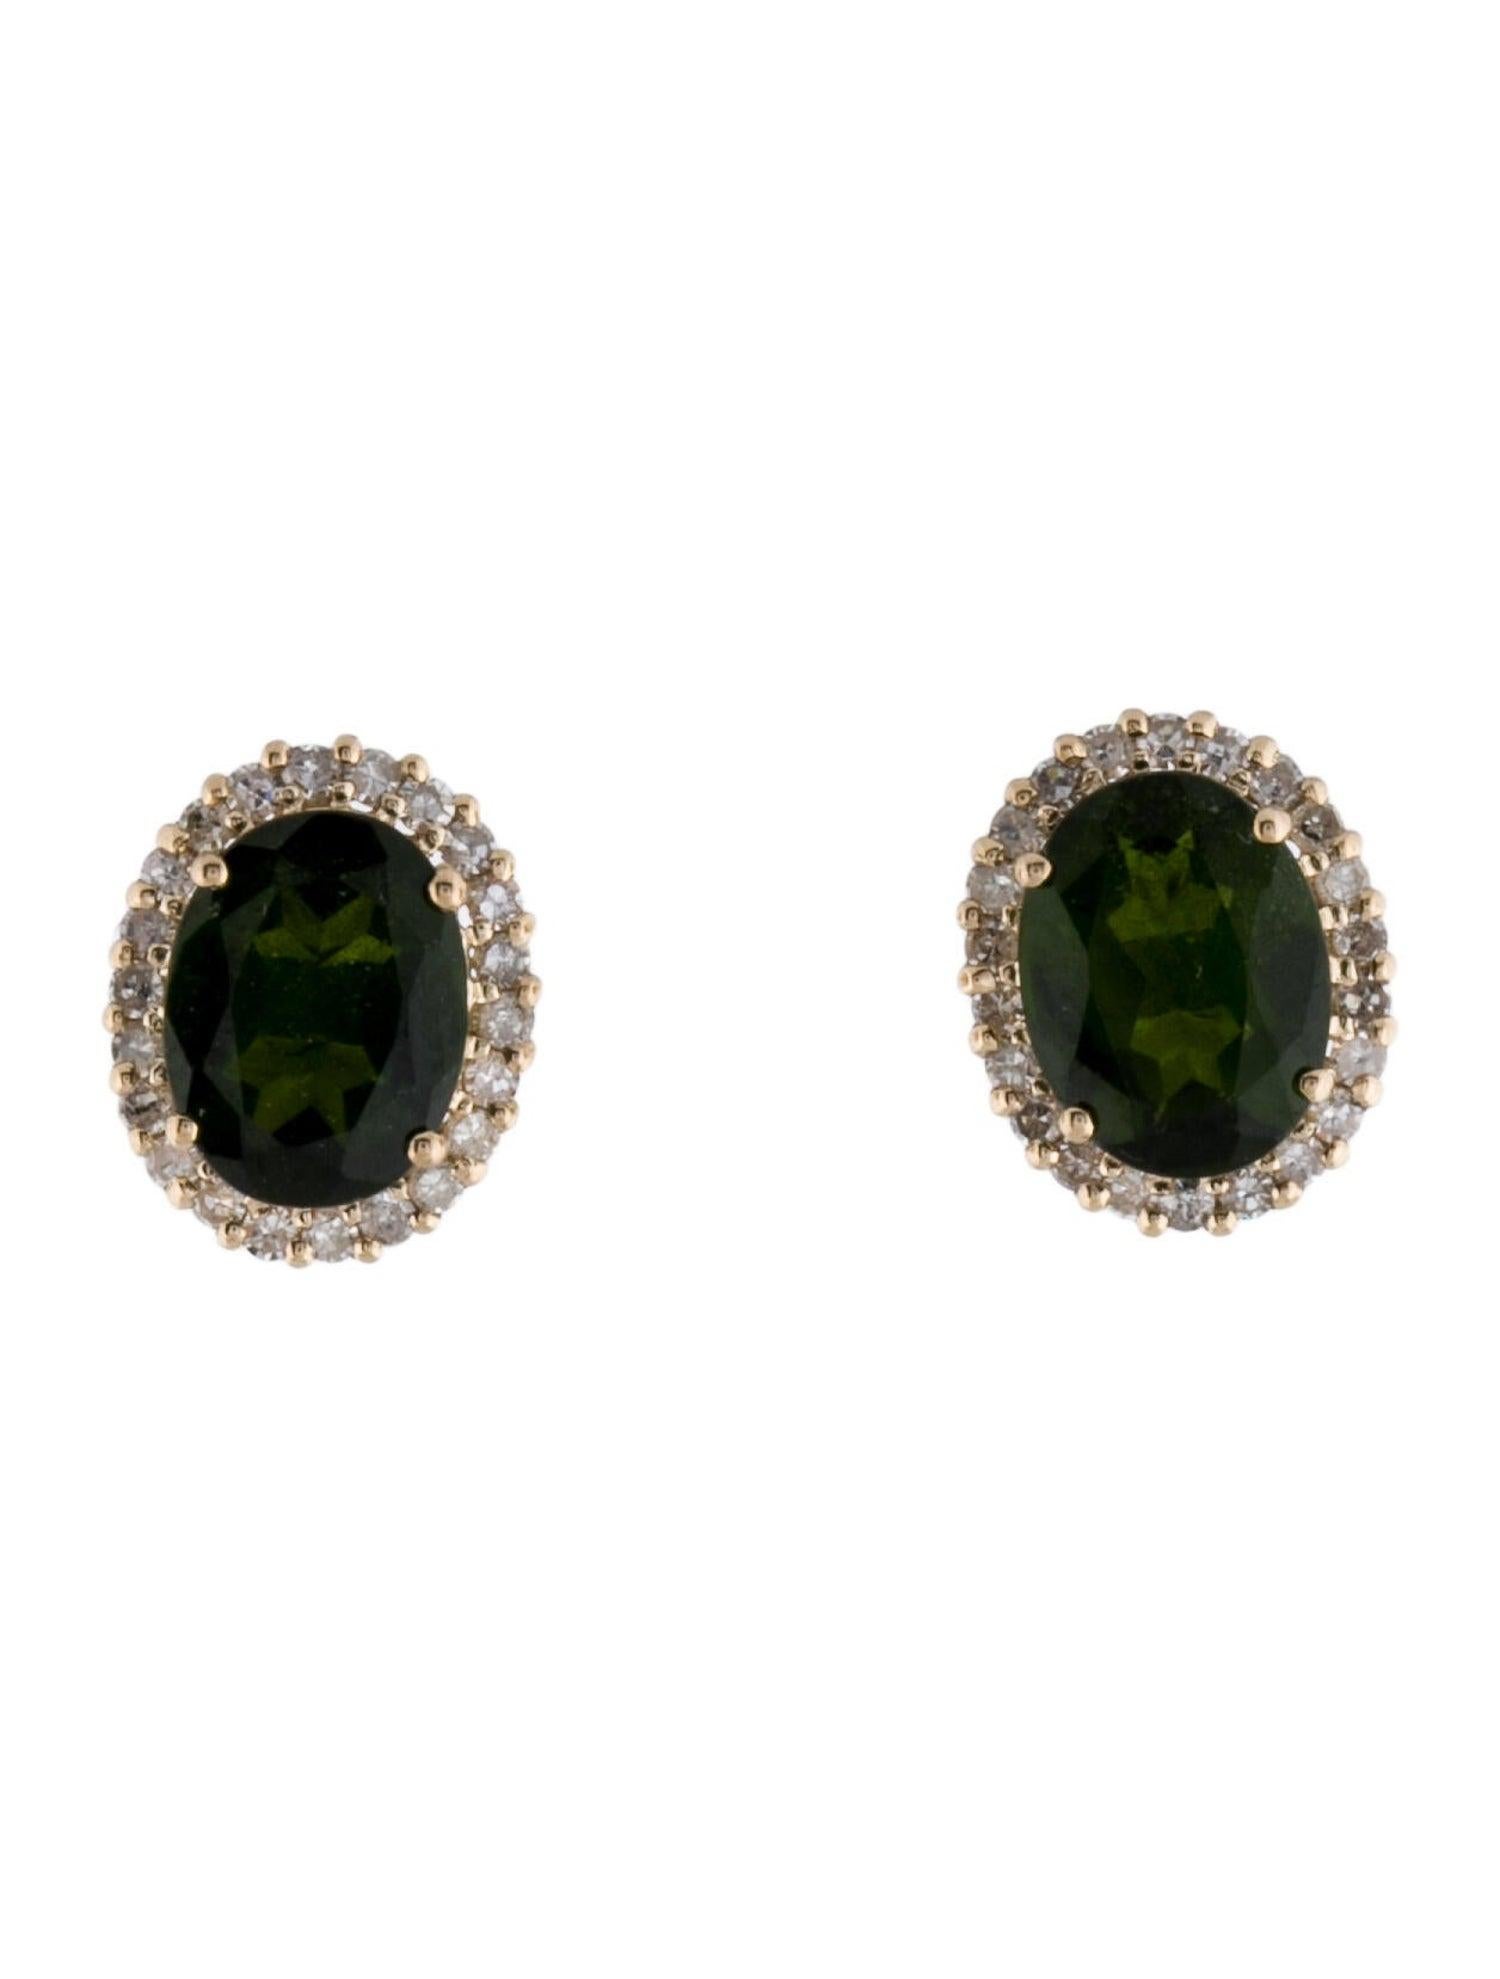 Elevate your jewelry collection with our exquisite Vivid Green Treasure Trove Earrings, a captivating creation from our 'Emerald Enigma' collection. Celebrating the hidden gem of the gemstone world, Chrome Diopside, these earrings exude a deep green